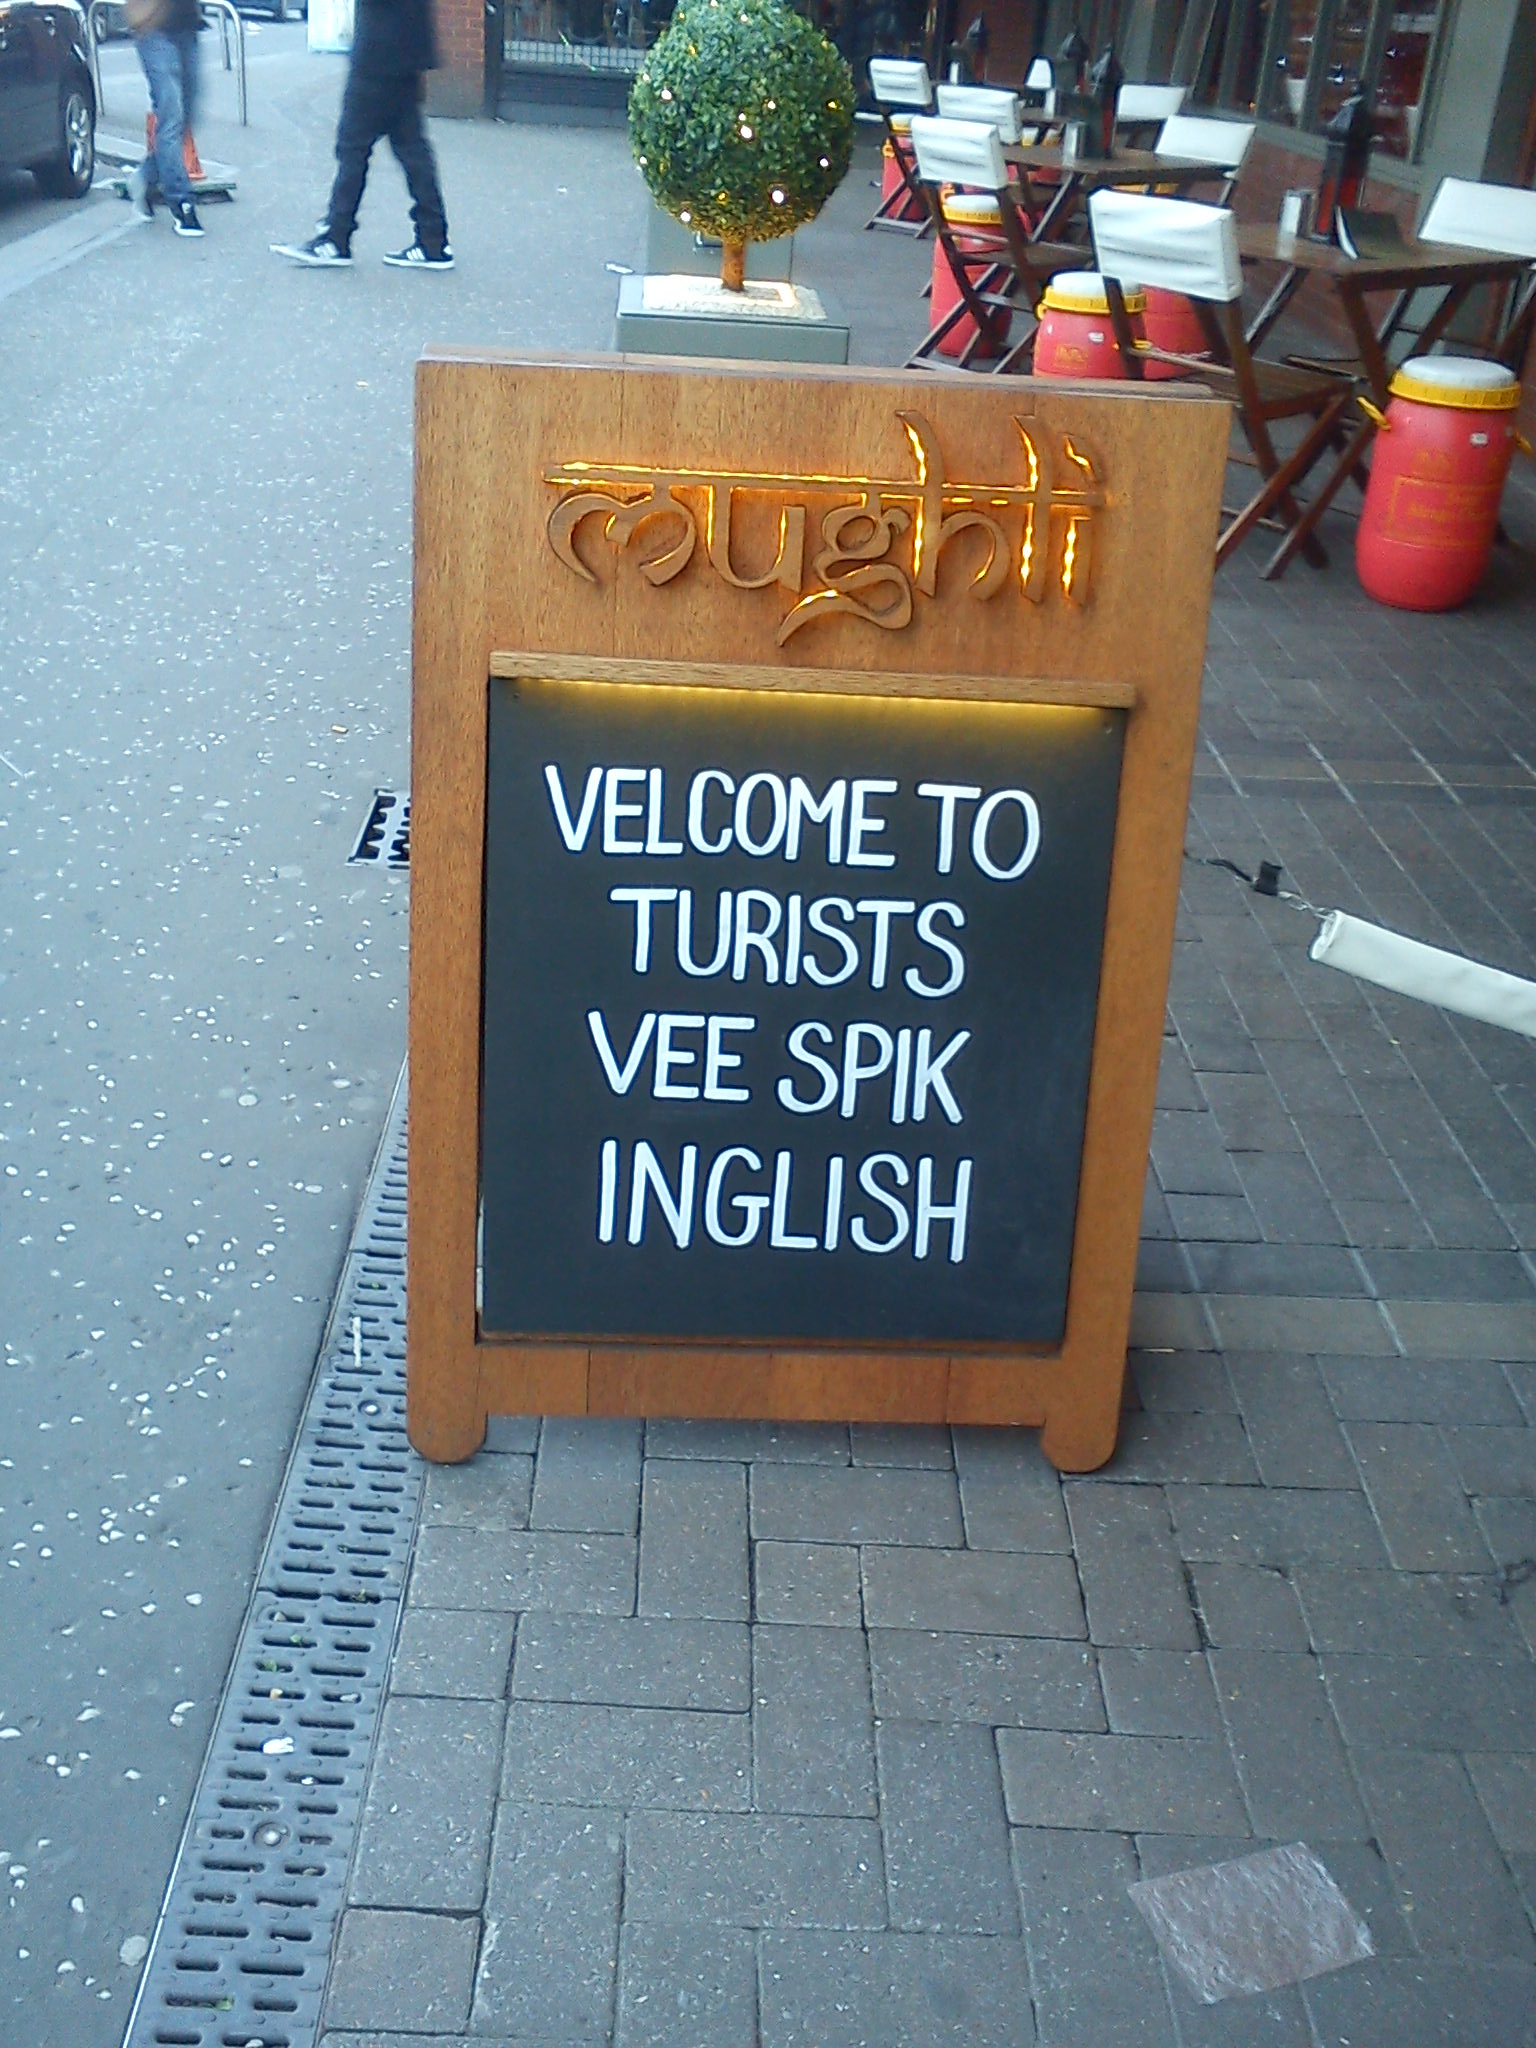 A sign I spotted outside an Indian Restaurant in Rusholme, Manchester.